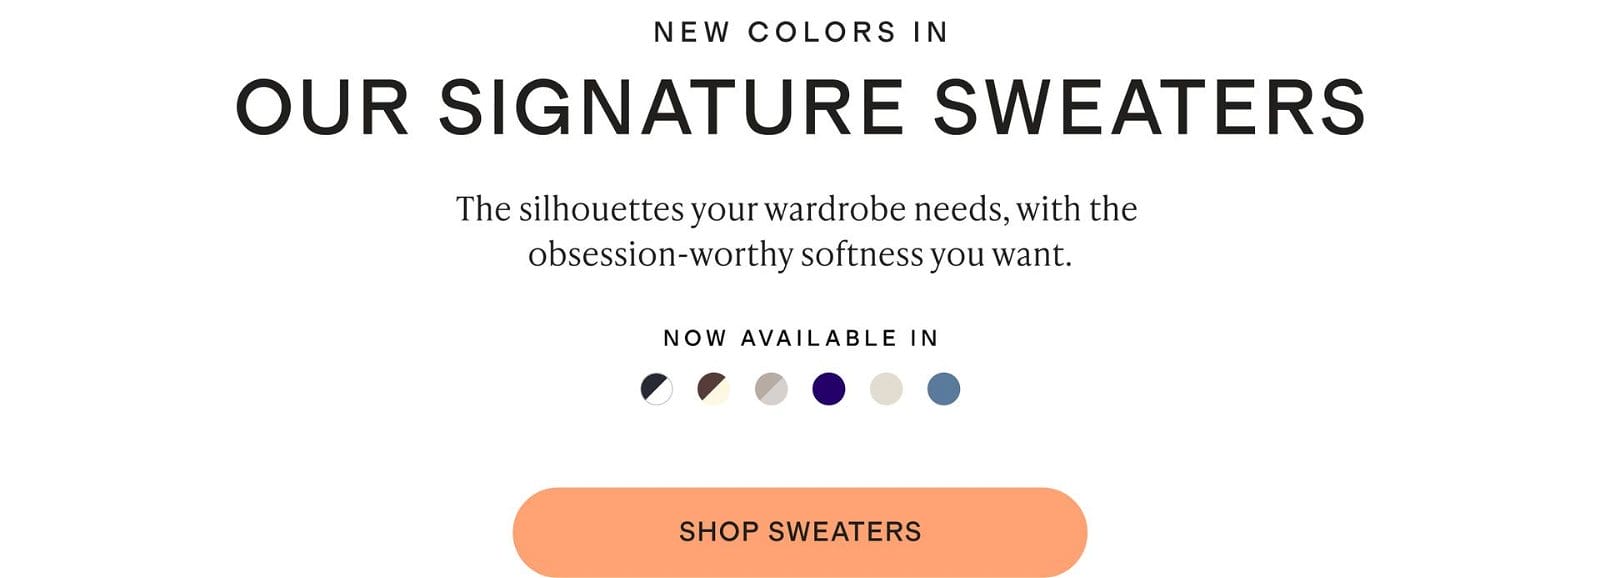 NEW COLORS IN OUR SIGNATURE SWEATERS